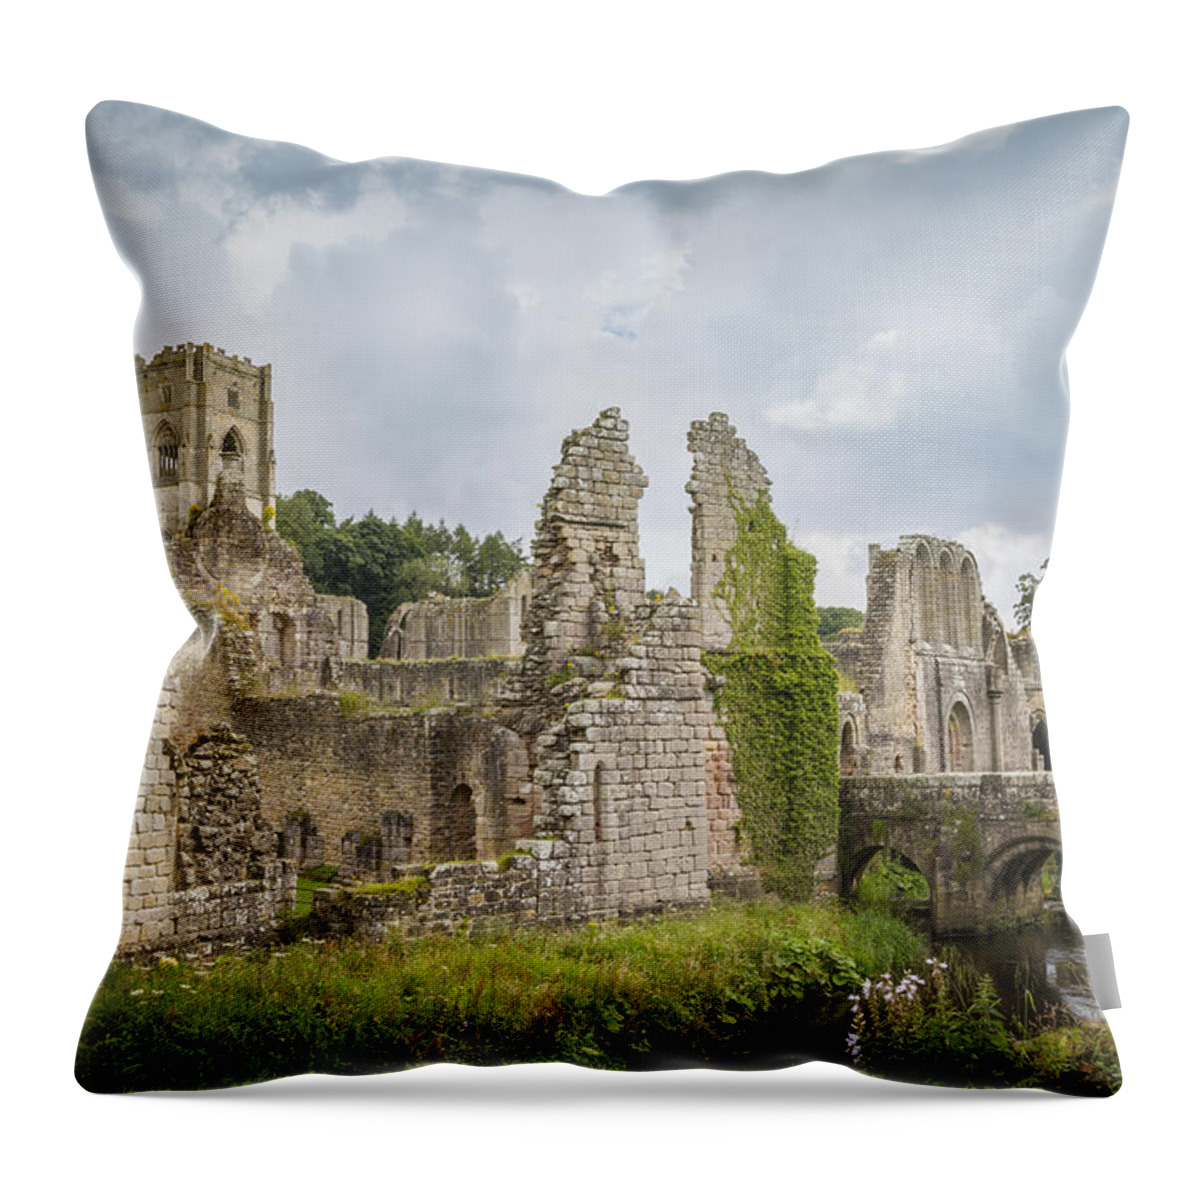 Fountains Abbey Throw Pillow featuring the photograph Fountains Abbey by Chris Smith